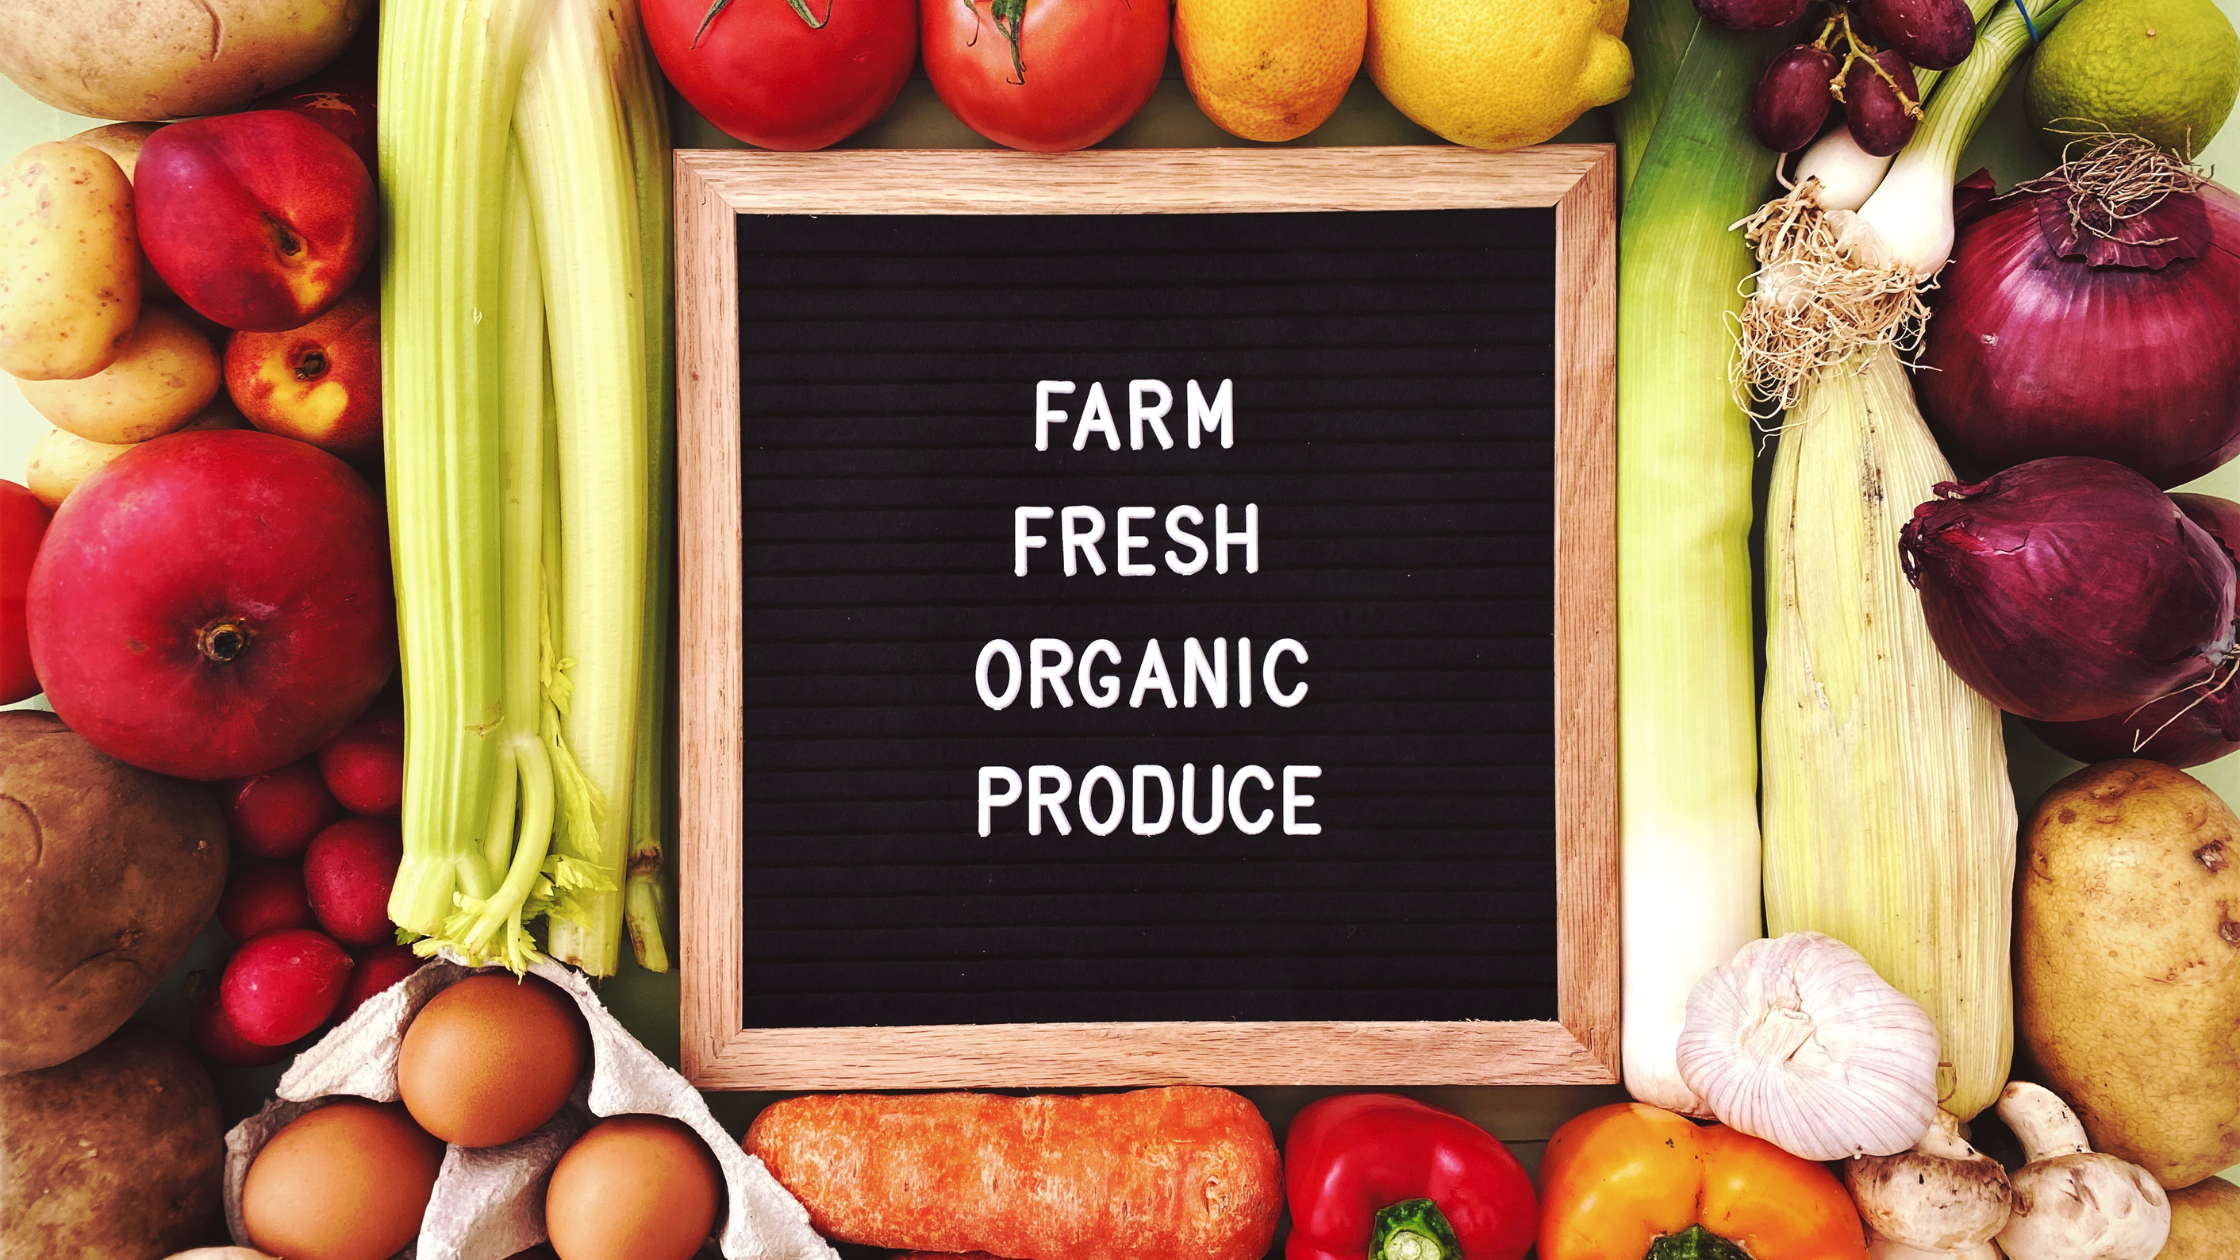 From Farm to Fork: (Produce Season) Facts and Figures